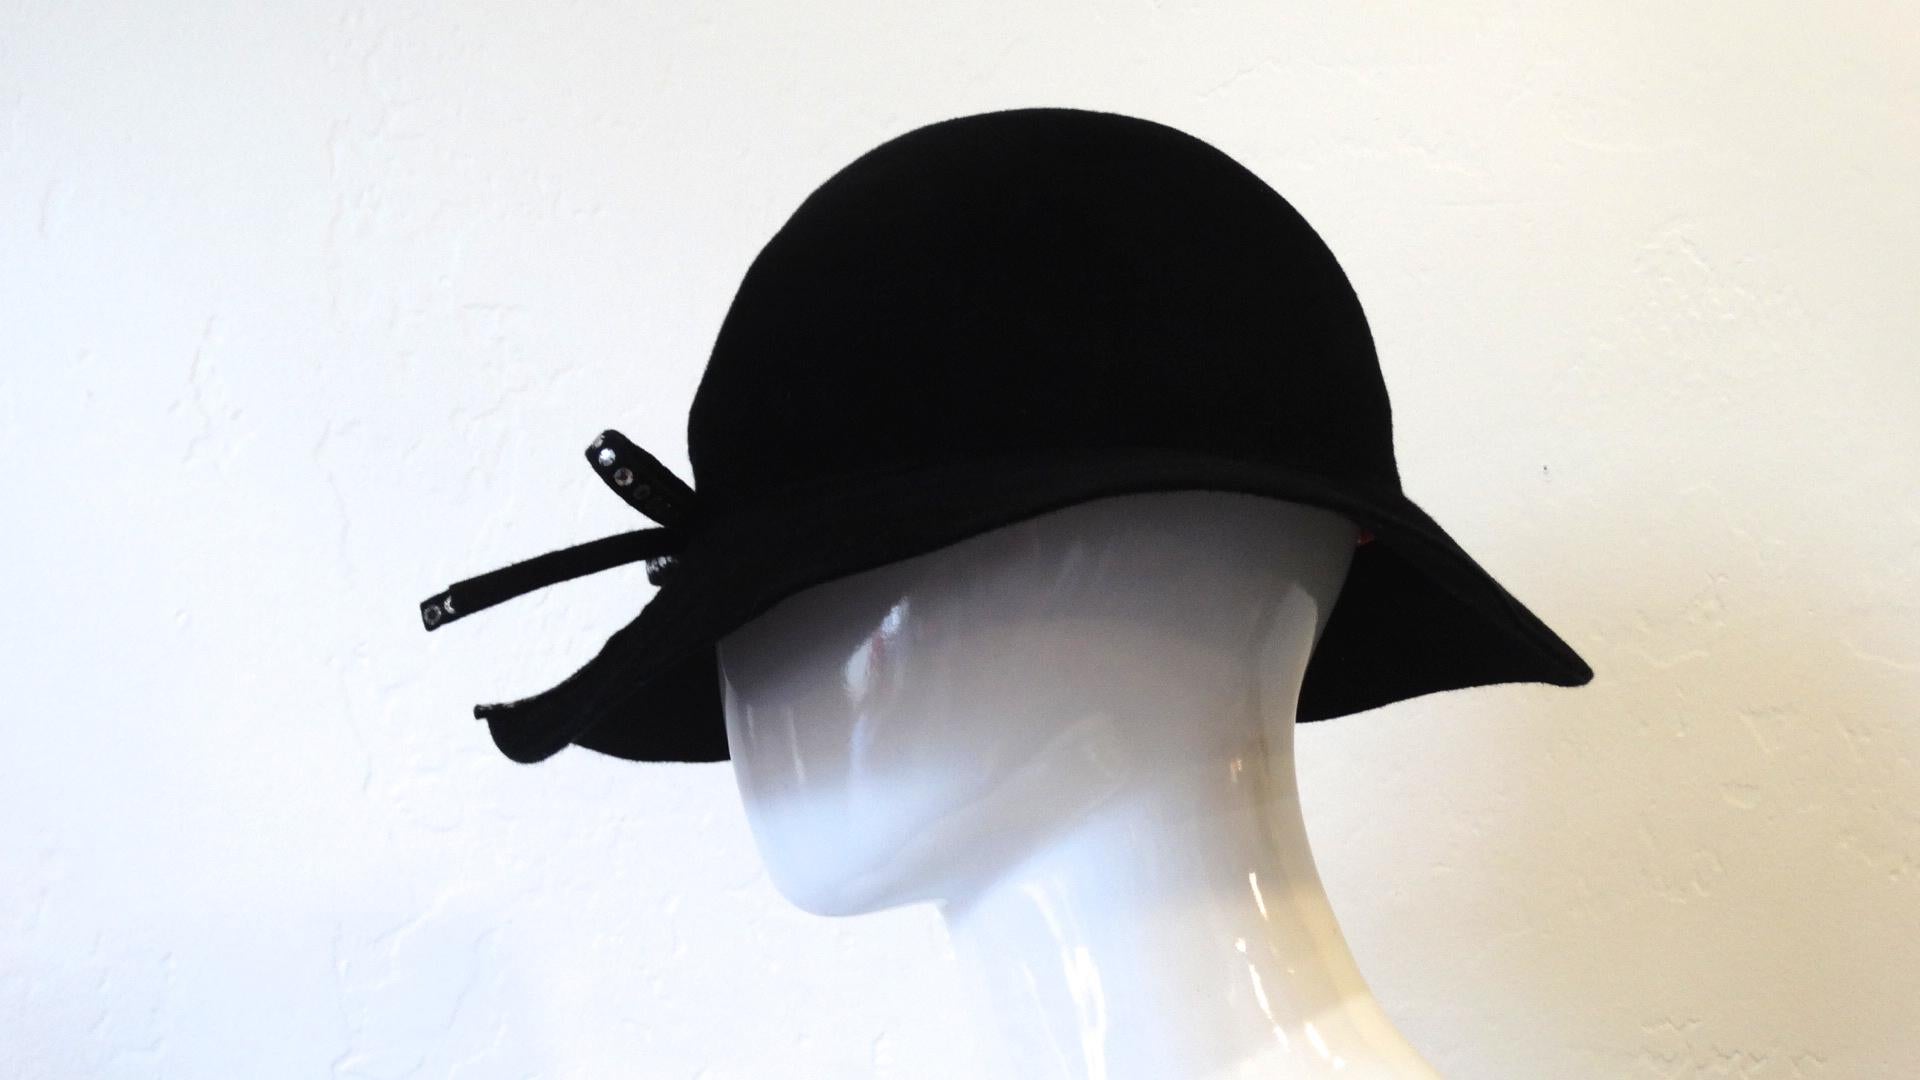 The Most Adorable 80s Hat Is Here! Made of black Wool, this wide brim derby hat features a unique slit in the brim and crown and is decorated with a rhinestone bow. Rhinestones also line the right side of the slit. The perfect hat for any outfit!